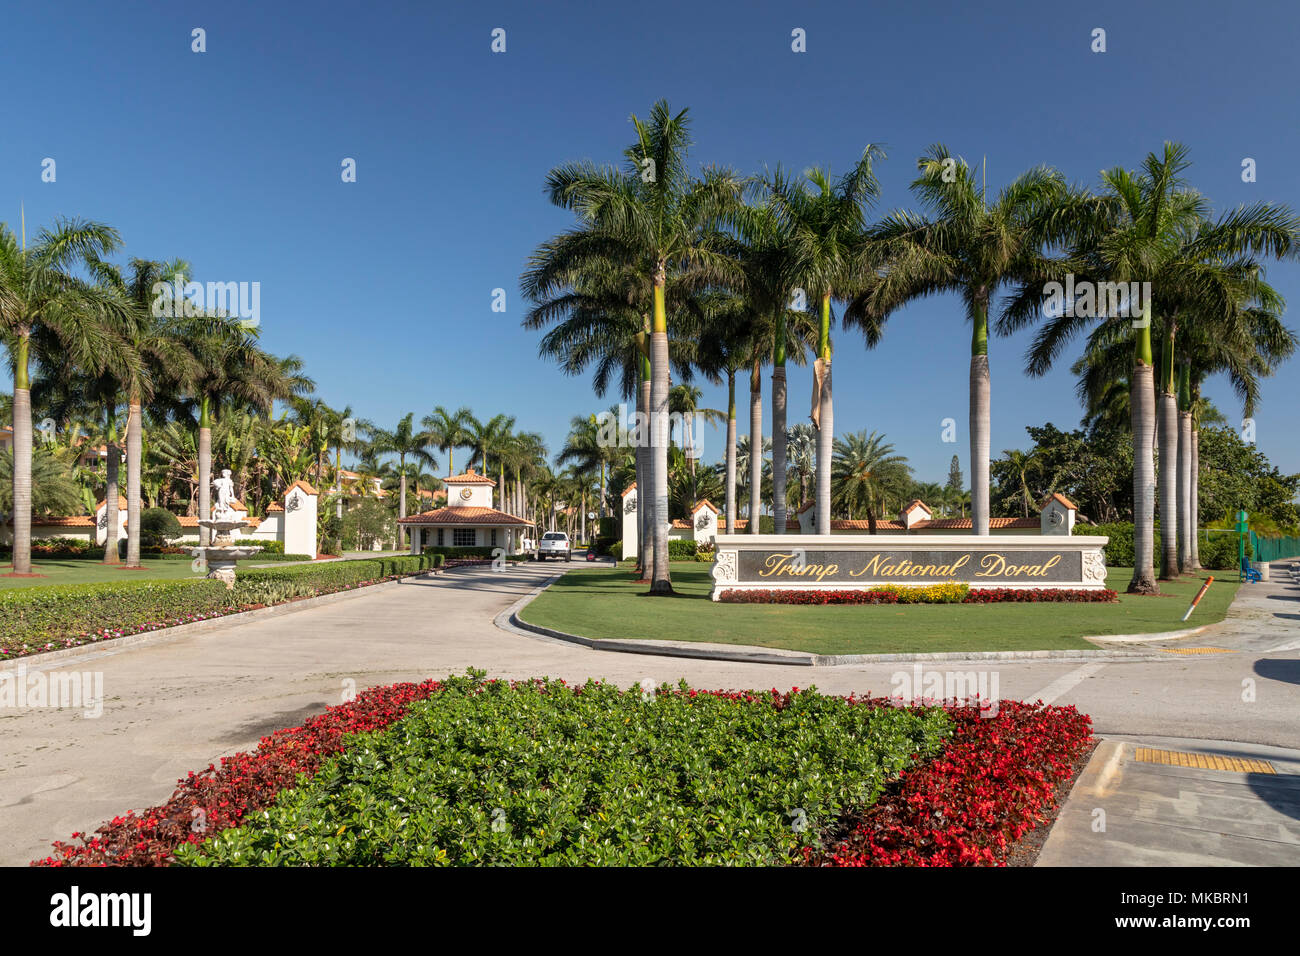 Doral, Florida - The entrance to the Trump National Doral golf club. The resort includes four golf courses and hundreds of hotel rooms. Stock Photo